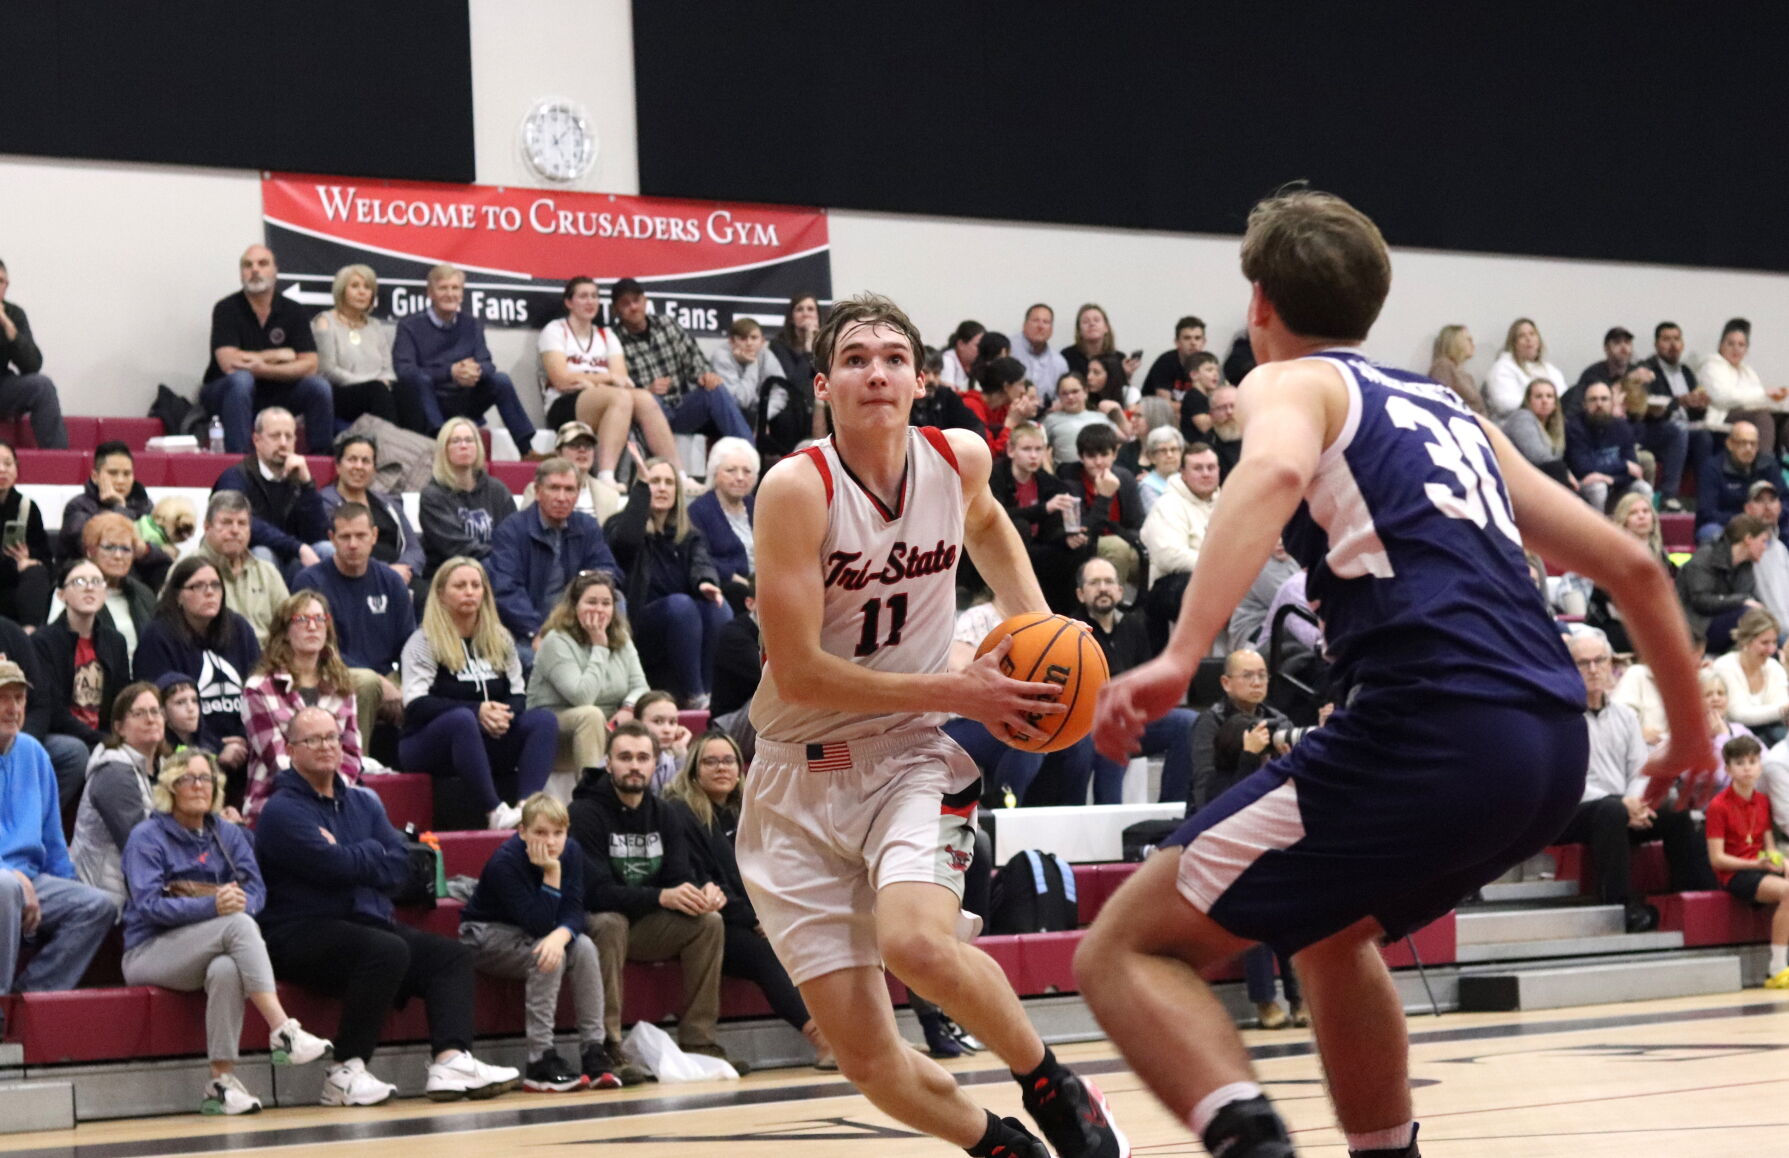 Tri-State Christian Clinches High-Scoring Victory Over Tome with Impressive Performances from Sam Falko and Jackson Sartin